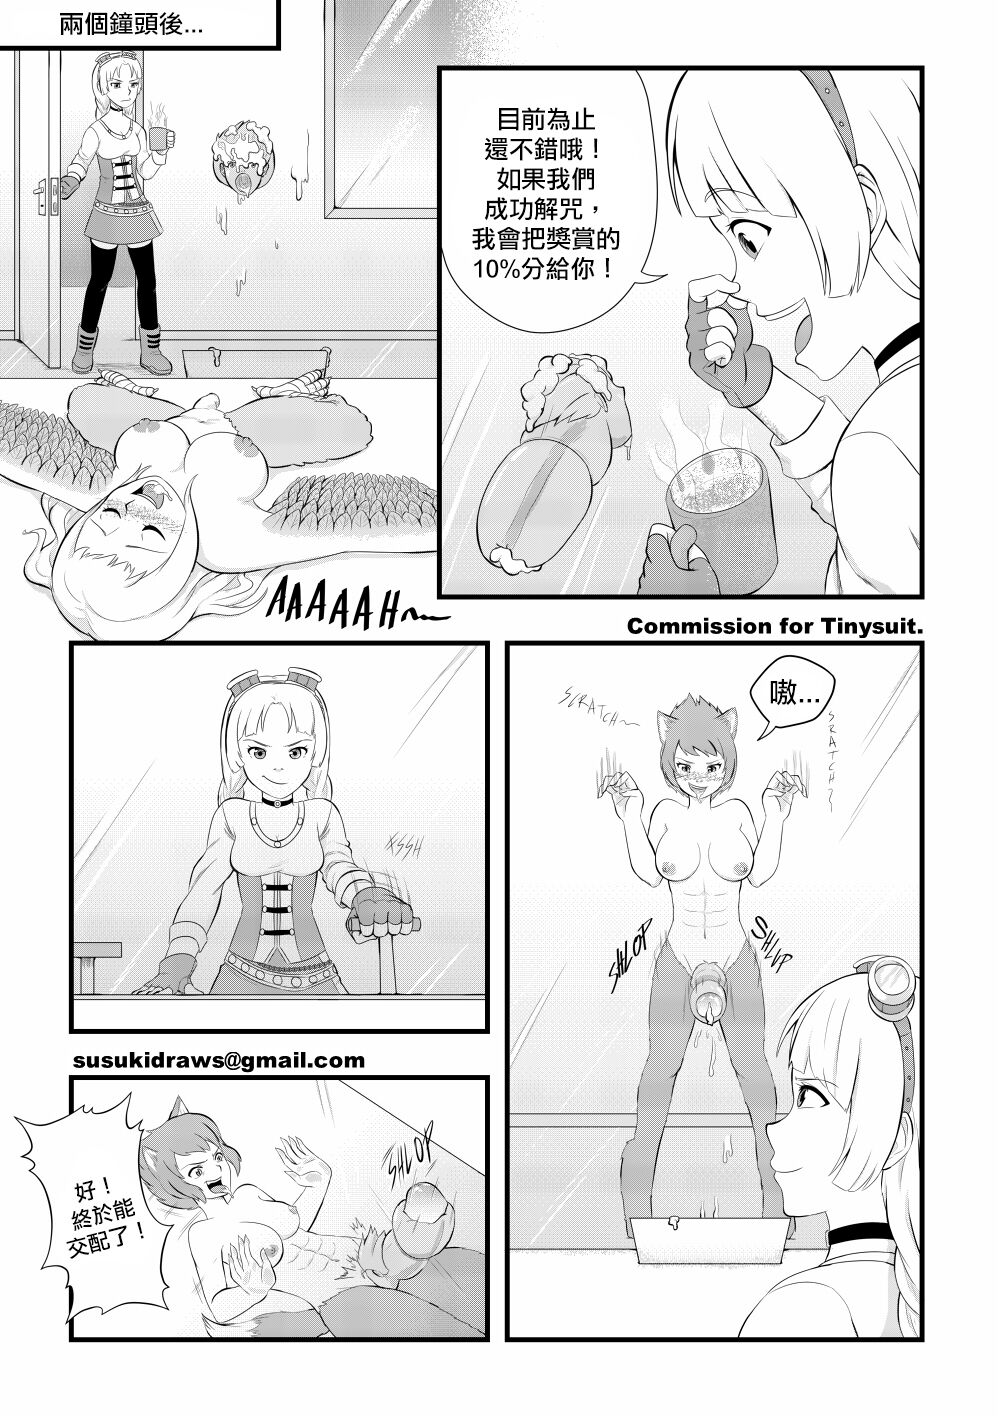 [Susuki-san] Onahole Guy [Chinese] [沒有漢化] [Ongoing] 